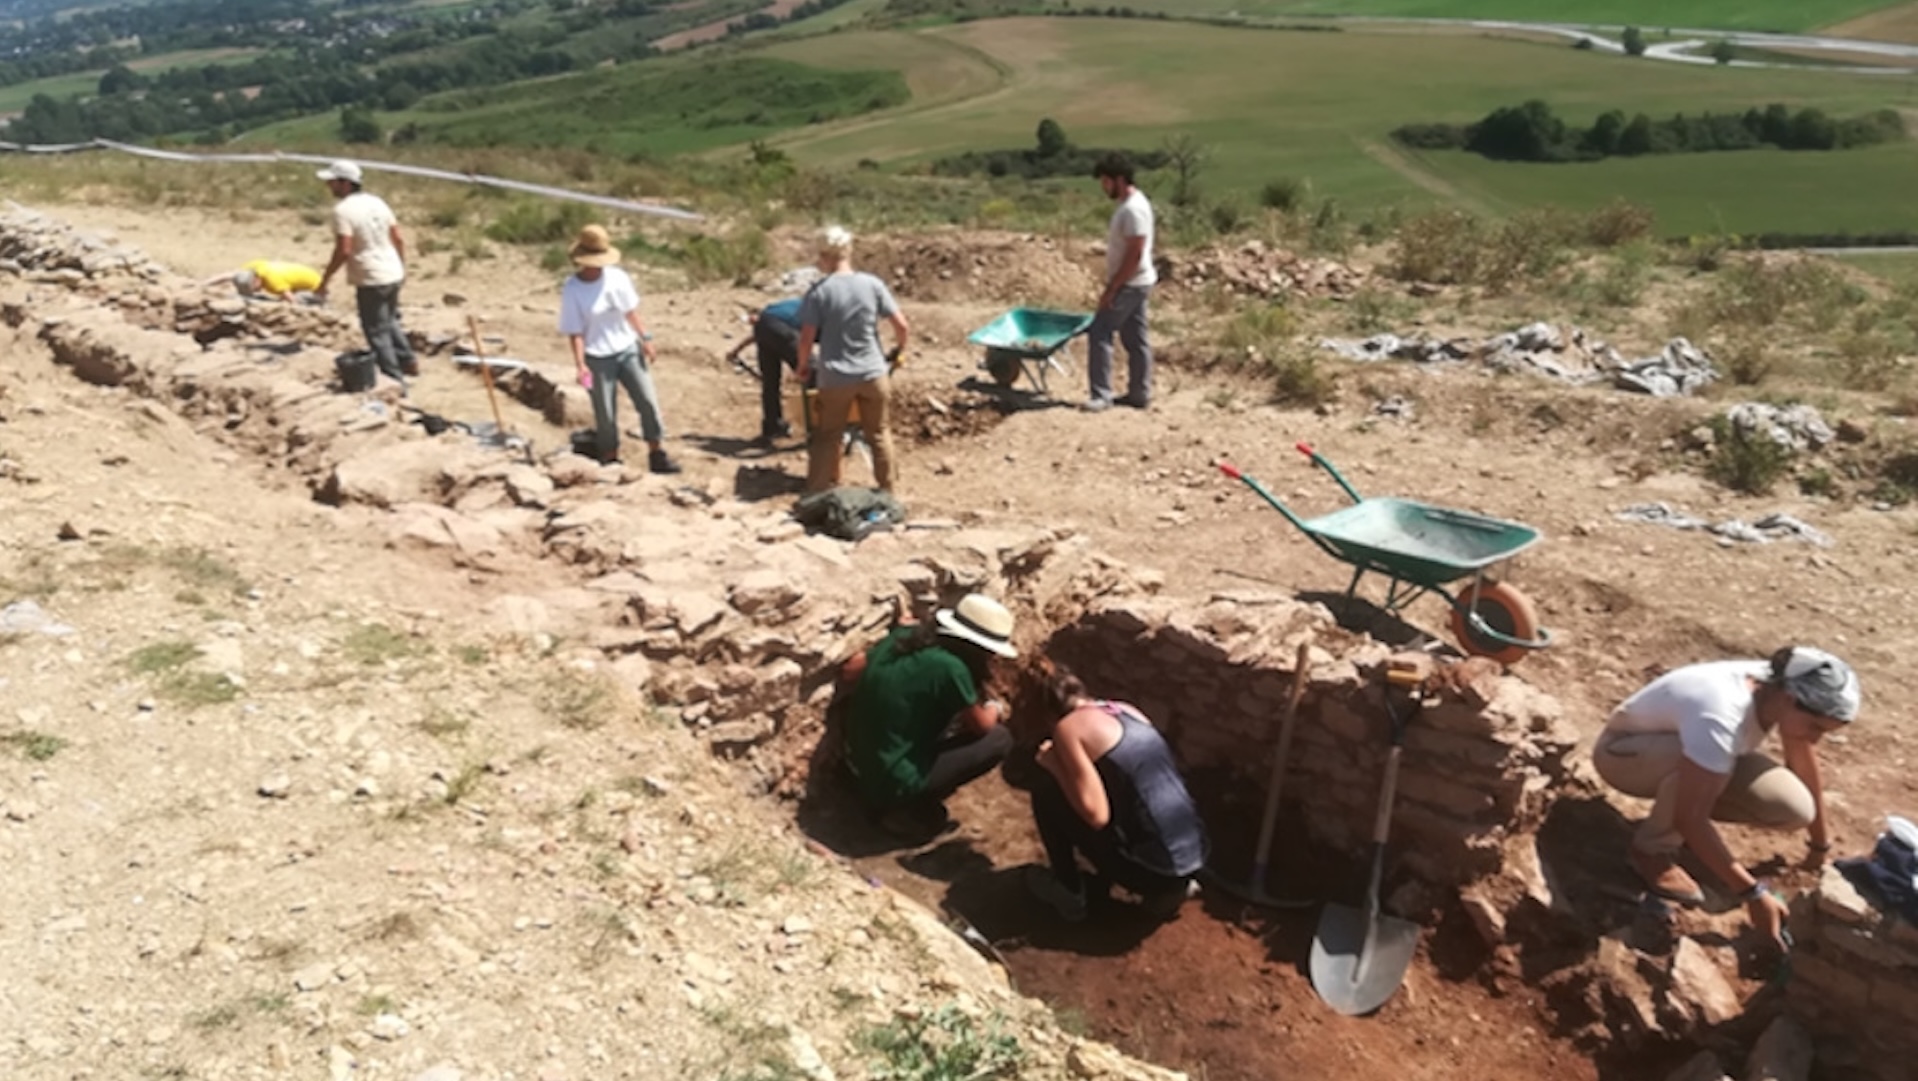 People from the Autonomous University of Barcelona excavating the site of the Iron Age settlement at Tossal de Baltarga.